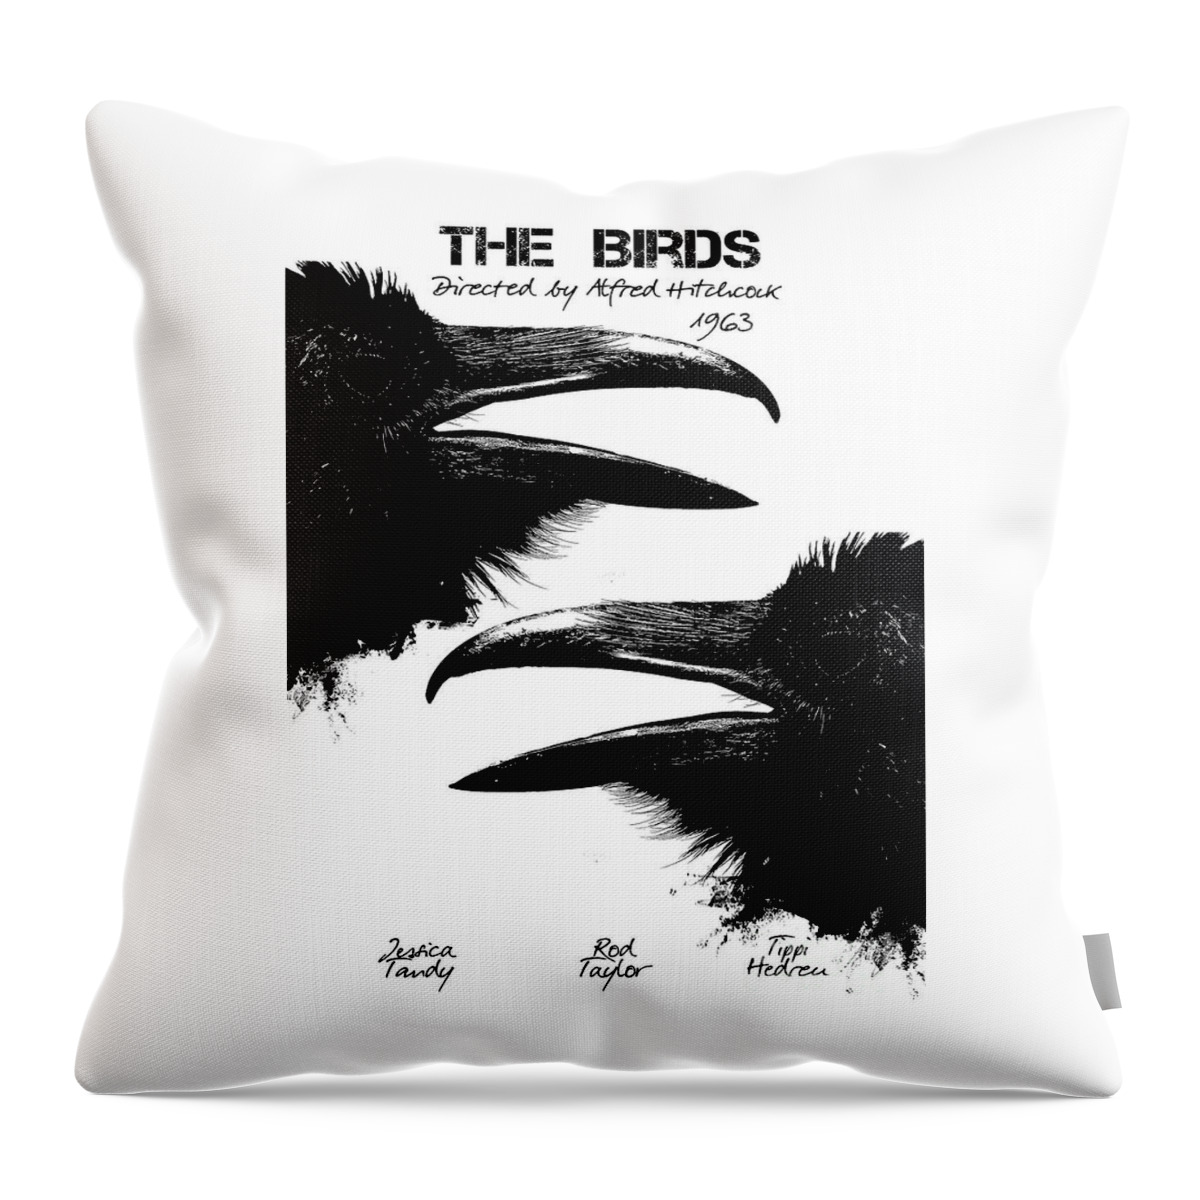 Film Poster Throw Pillow featuring the digital art The Birds by Alfred Hitchcock by Justyna Jaszke JBJart